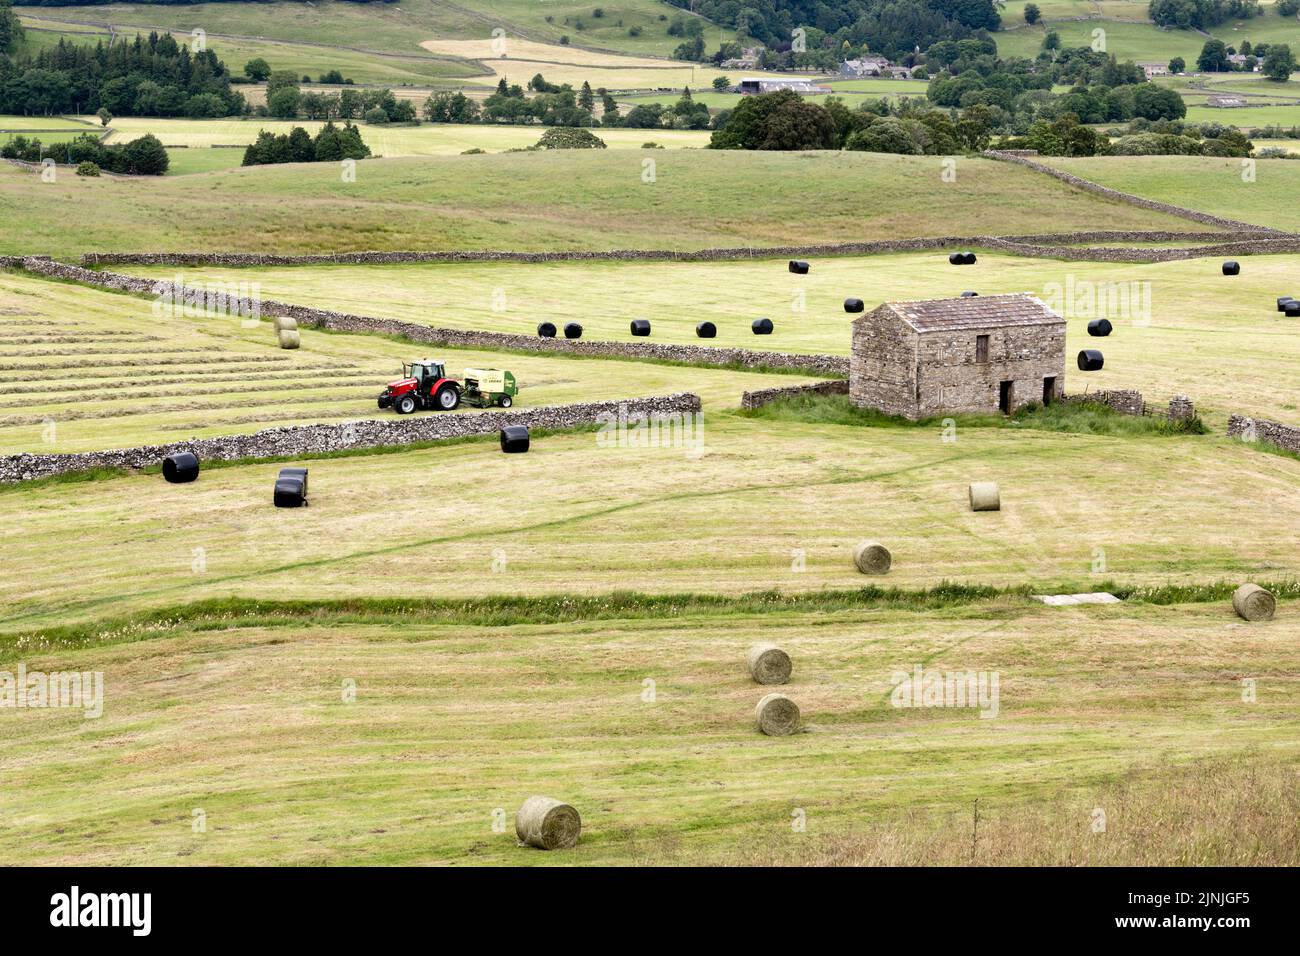 Summer haymaking, Hawes, Wensleydale, Yorkshire Dales National Park. A tractor and baler convert mown grass into round bales for use as winter feed. Stock Photo